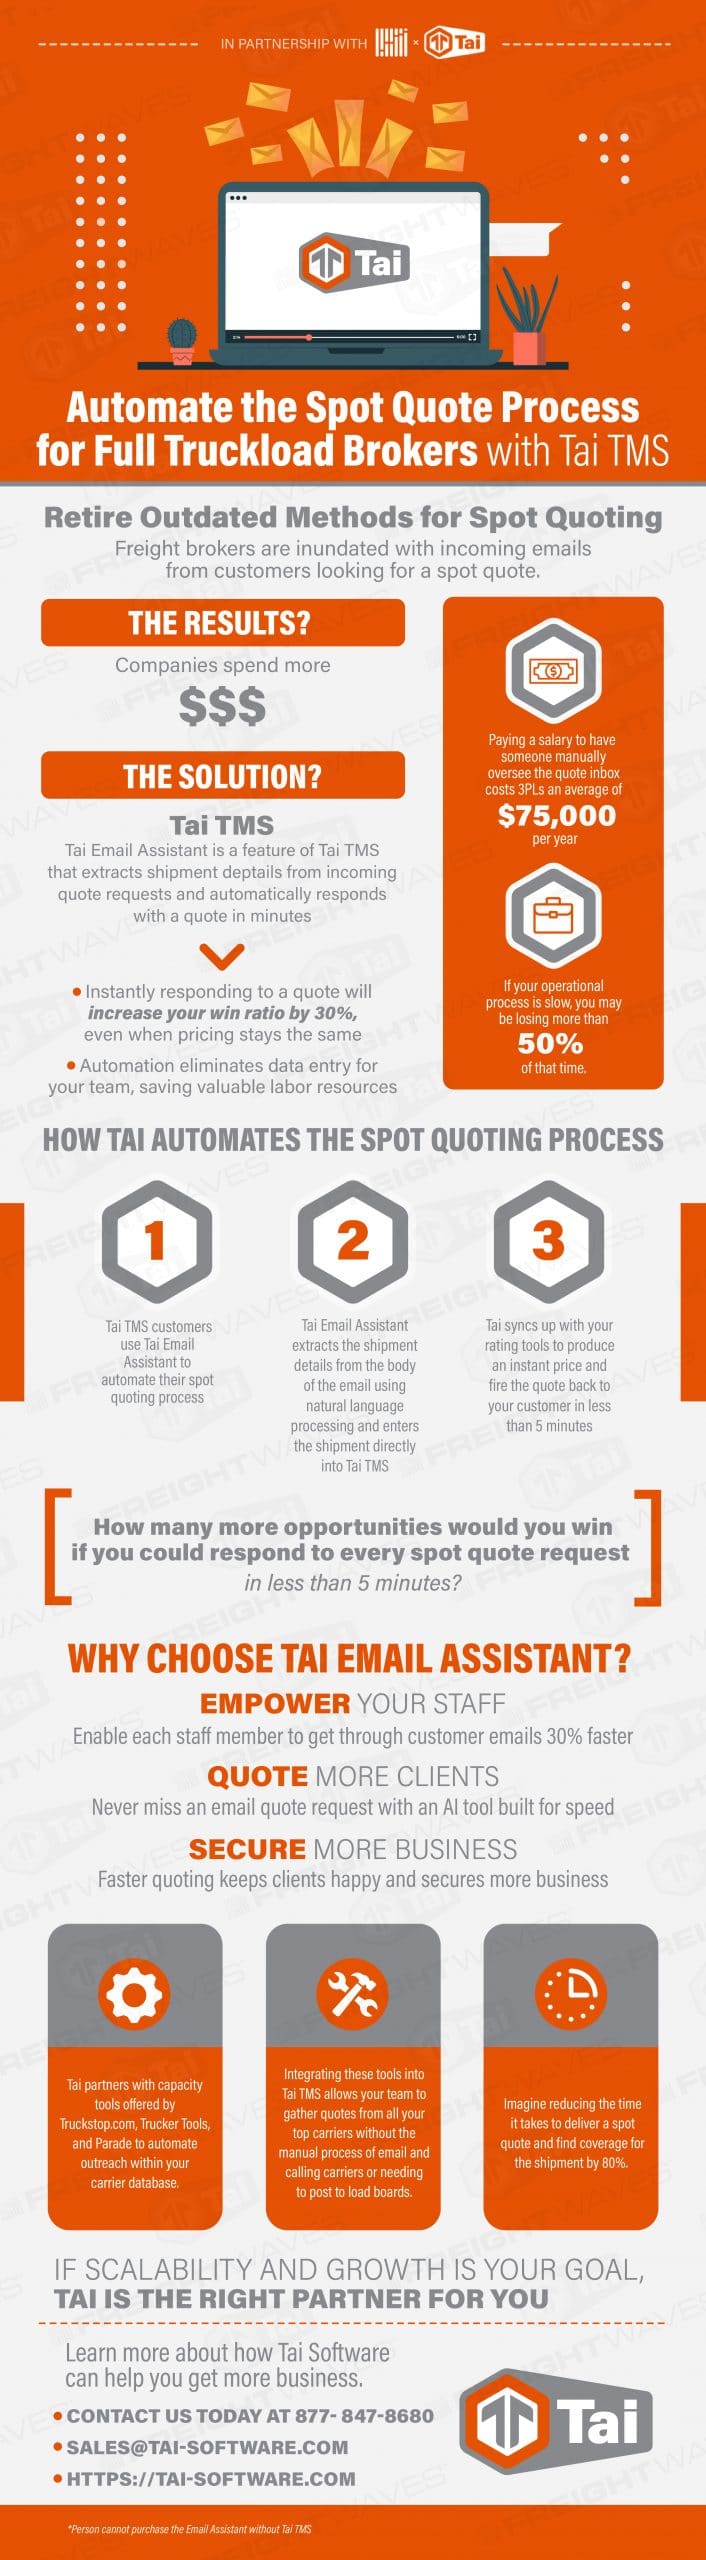 Automate the Spot Quote Process for Full Truckload Brokers